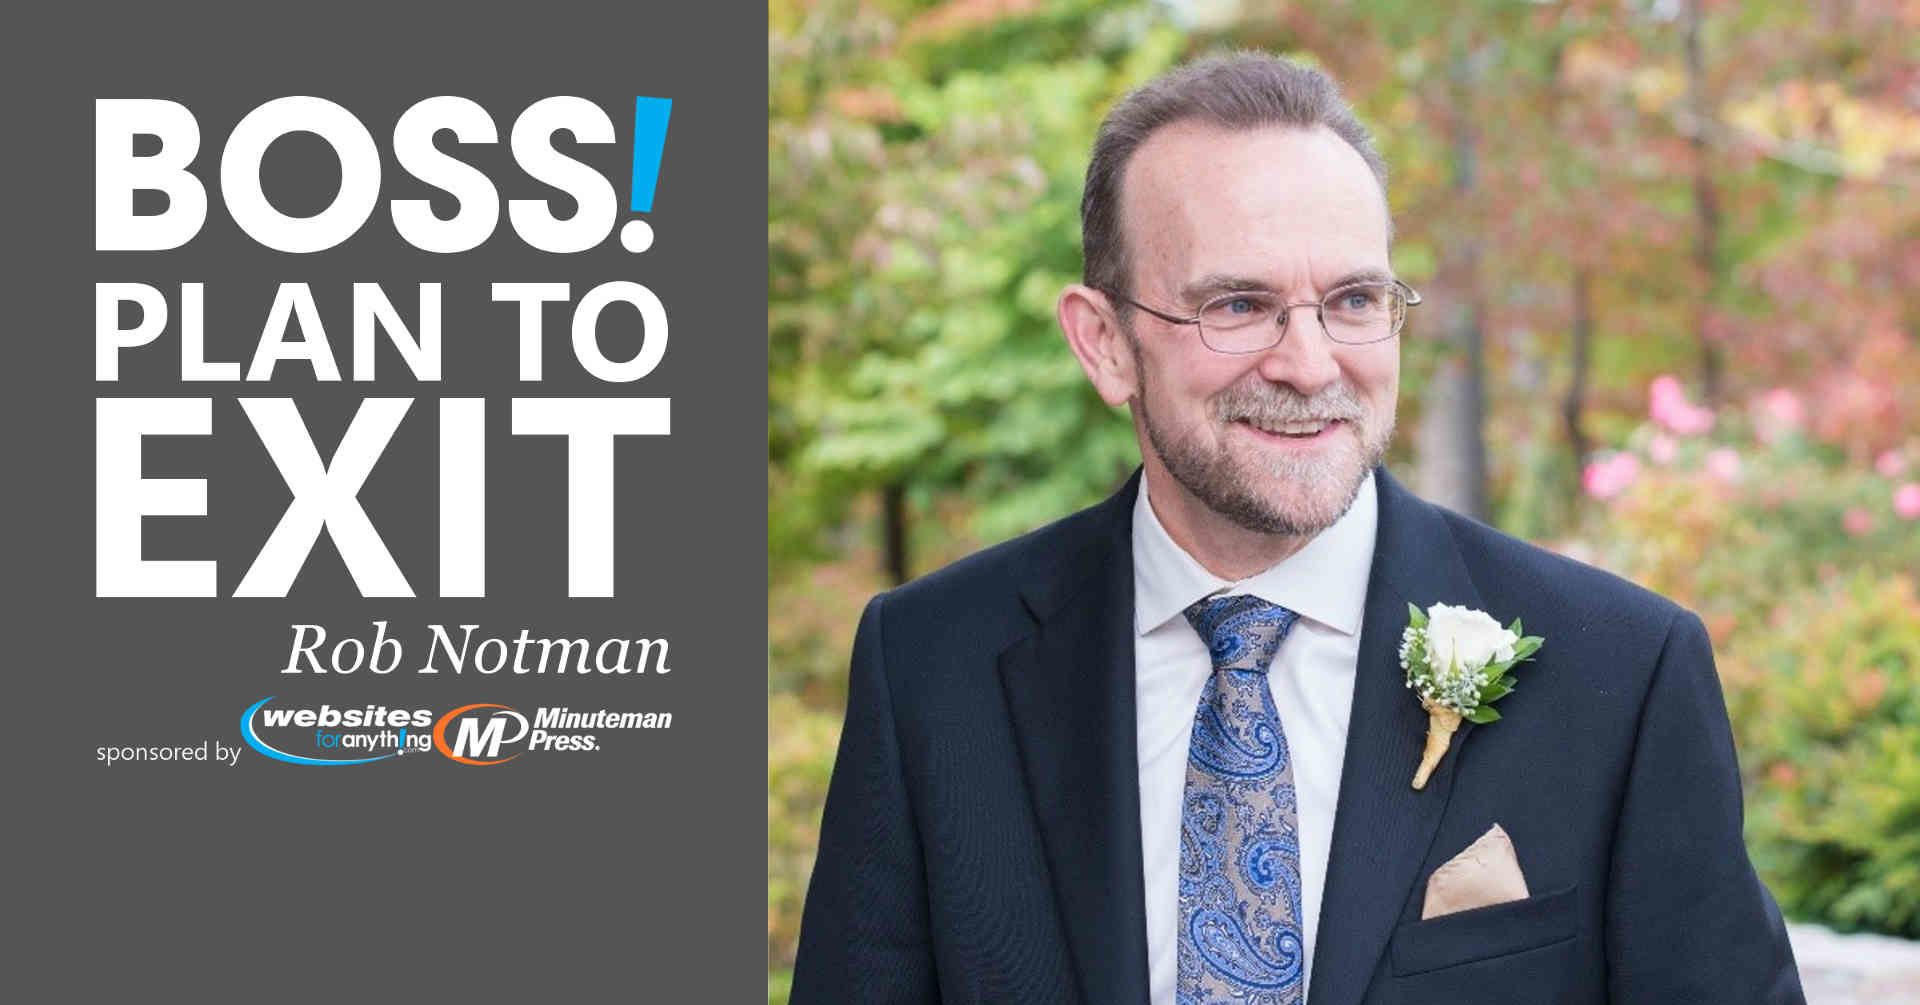 Plan to Exit with Rob Notman at BOSS on March 17th 2020